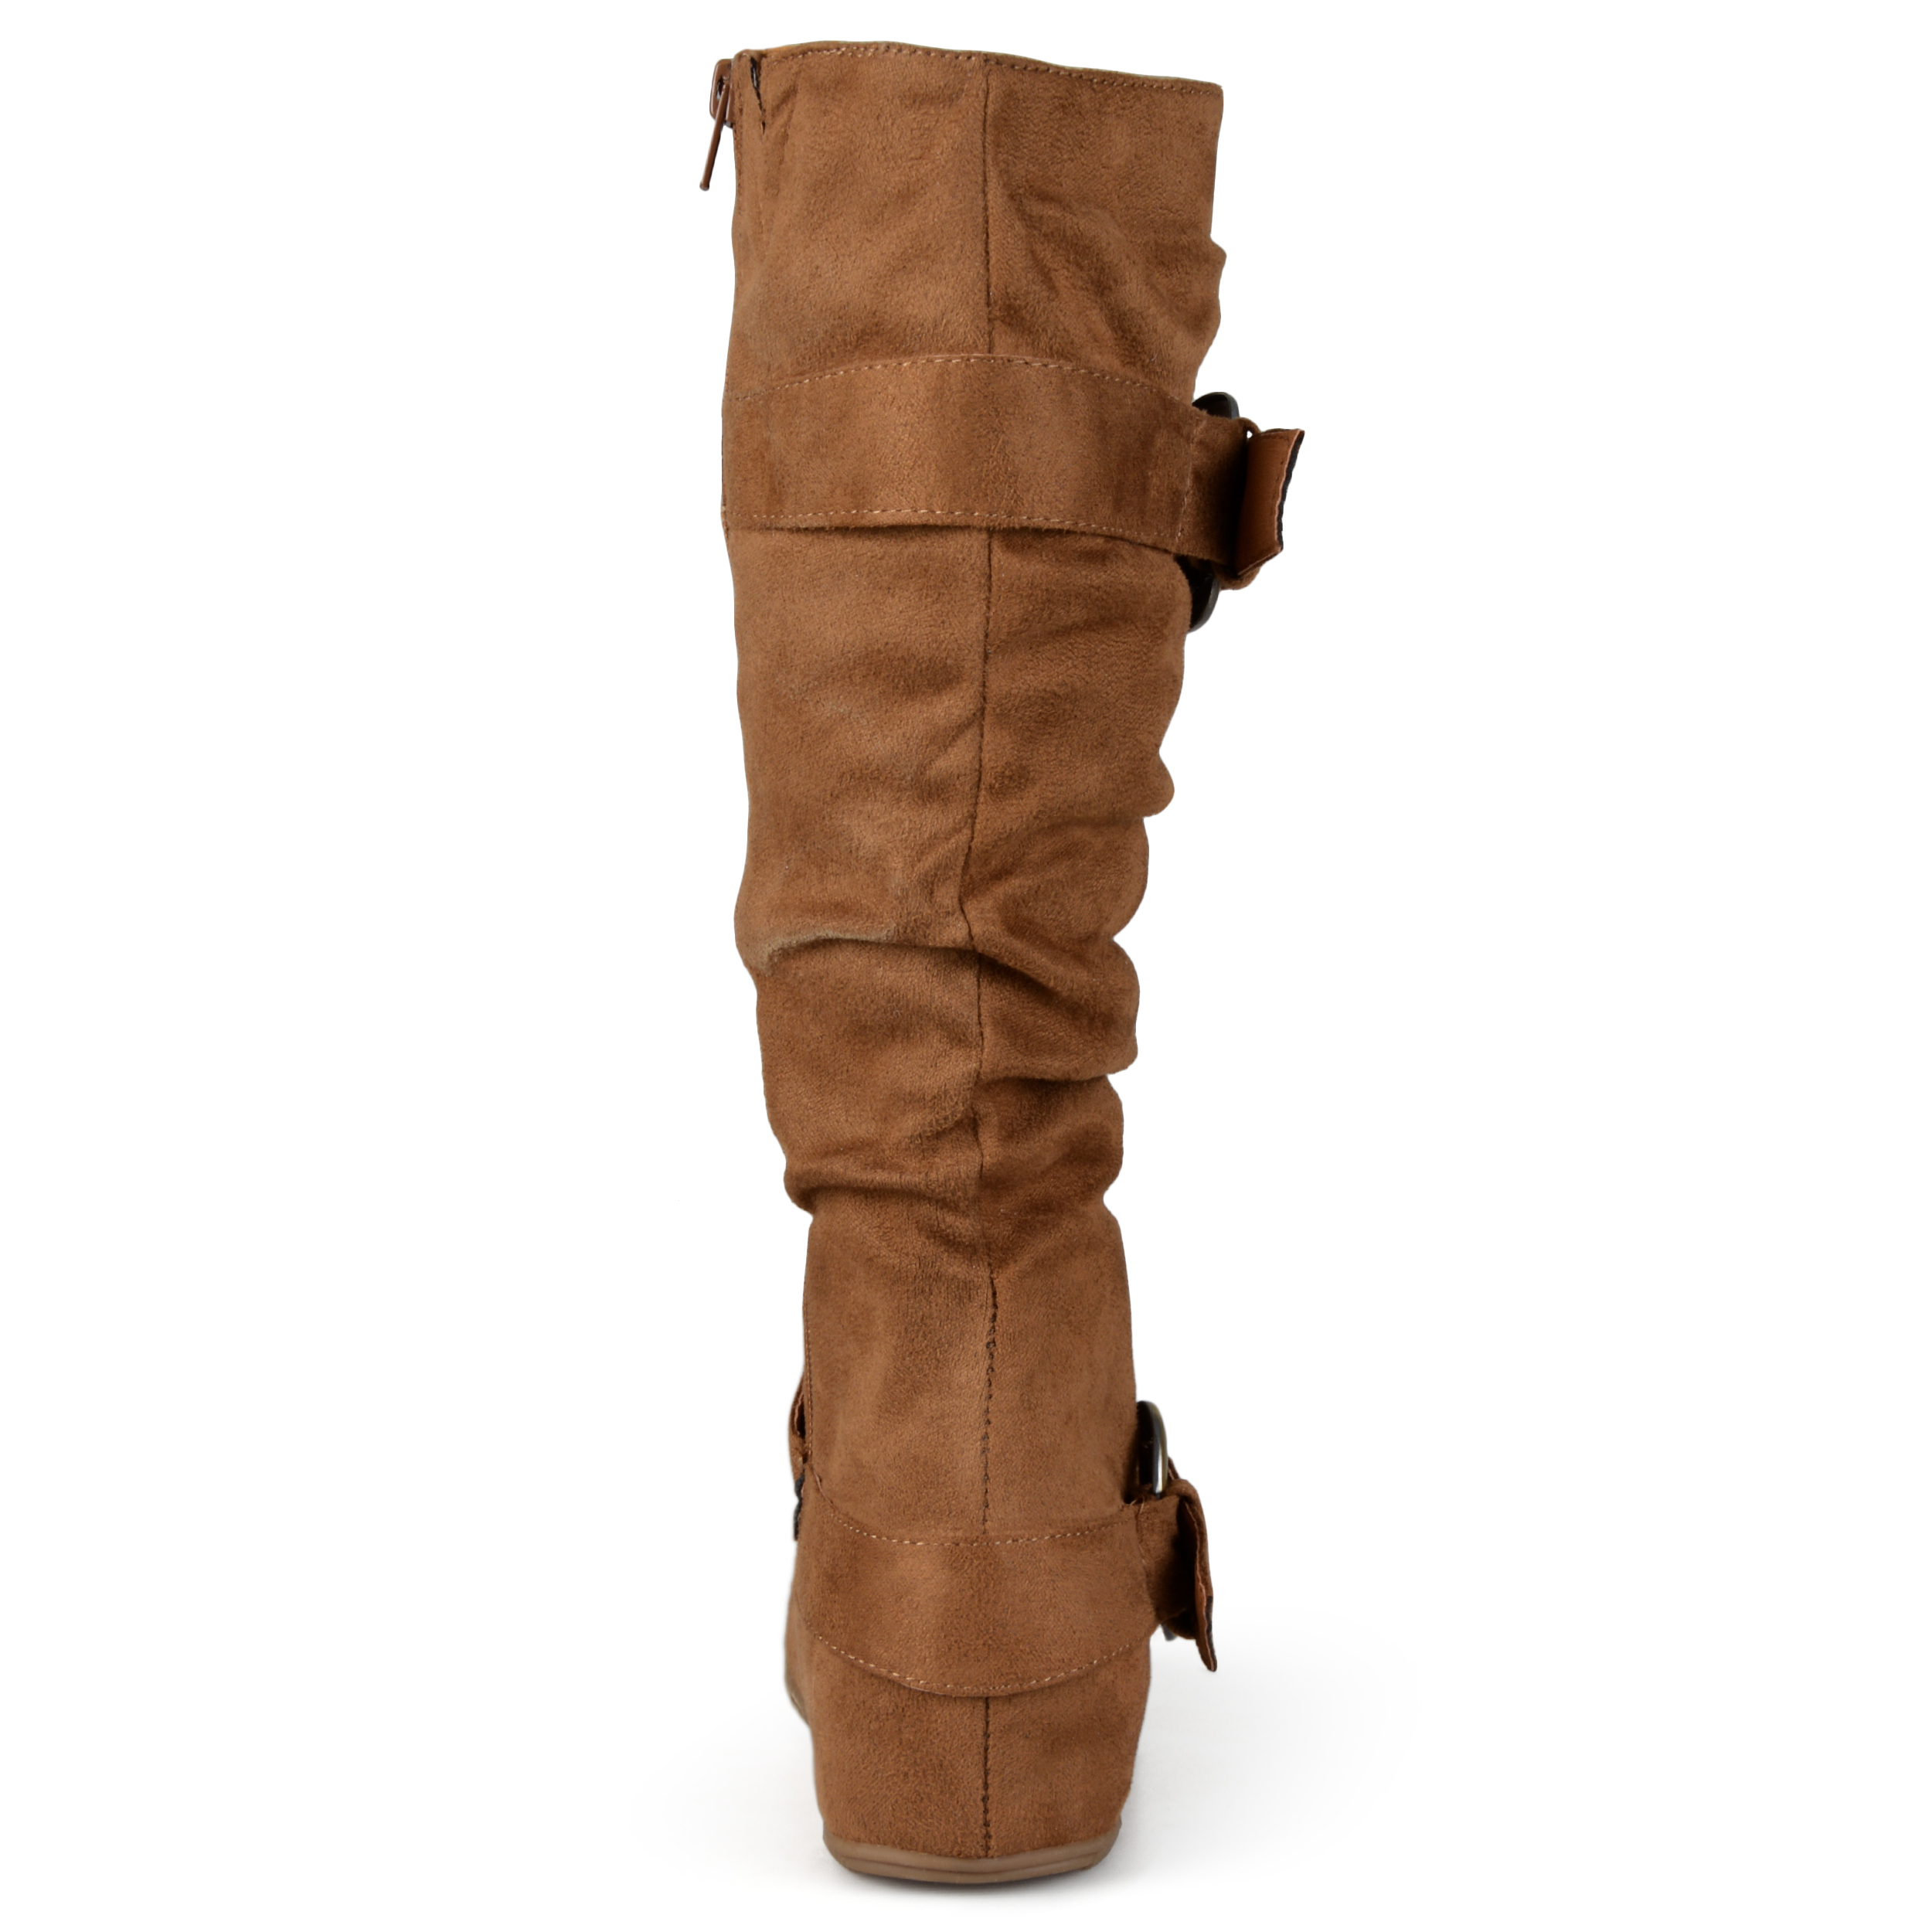 Women's August Slouchy Wide Calf Boots - image 4 of 8